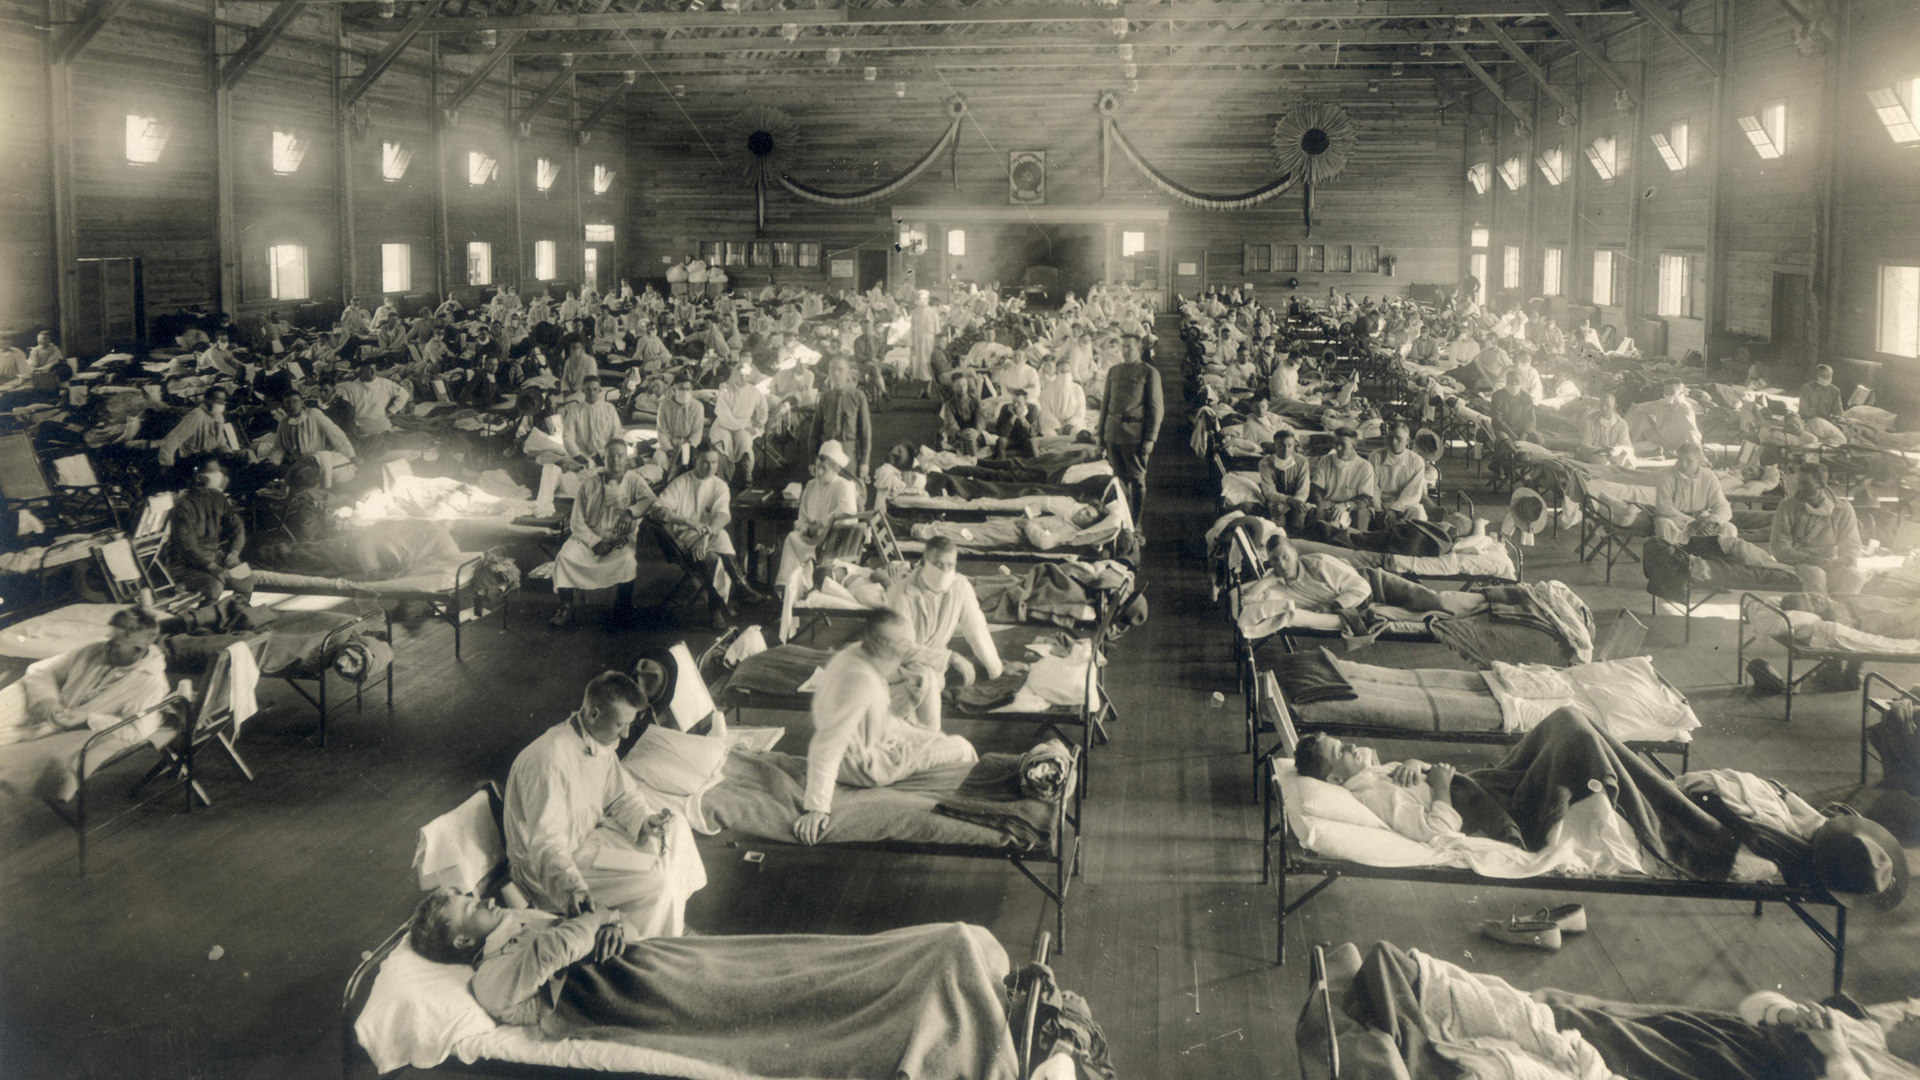 A hospital in Kansas during the Spanish flu epidemic in 1918.